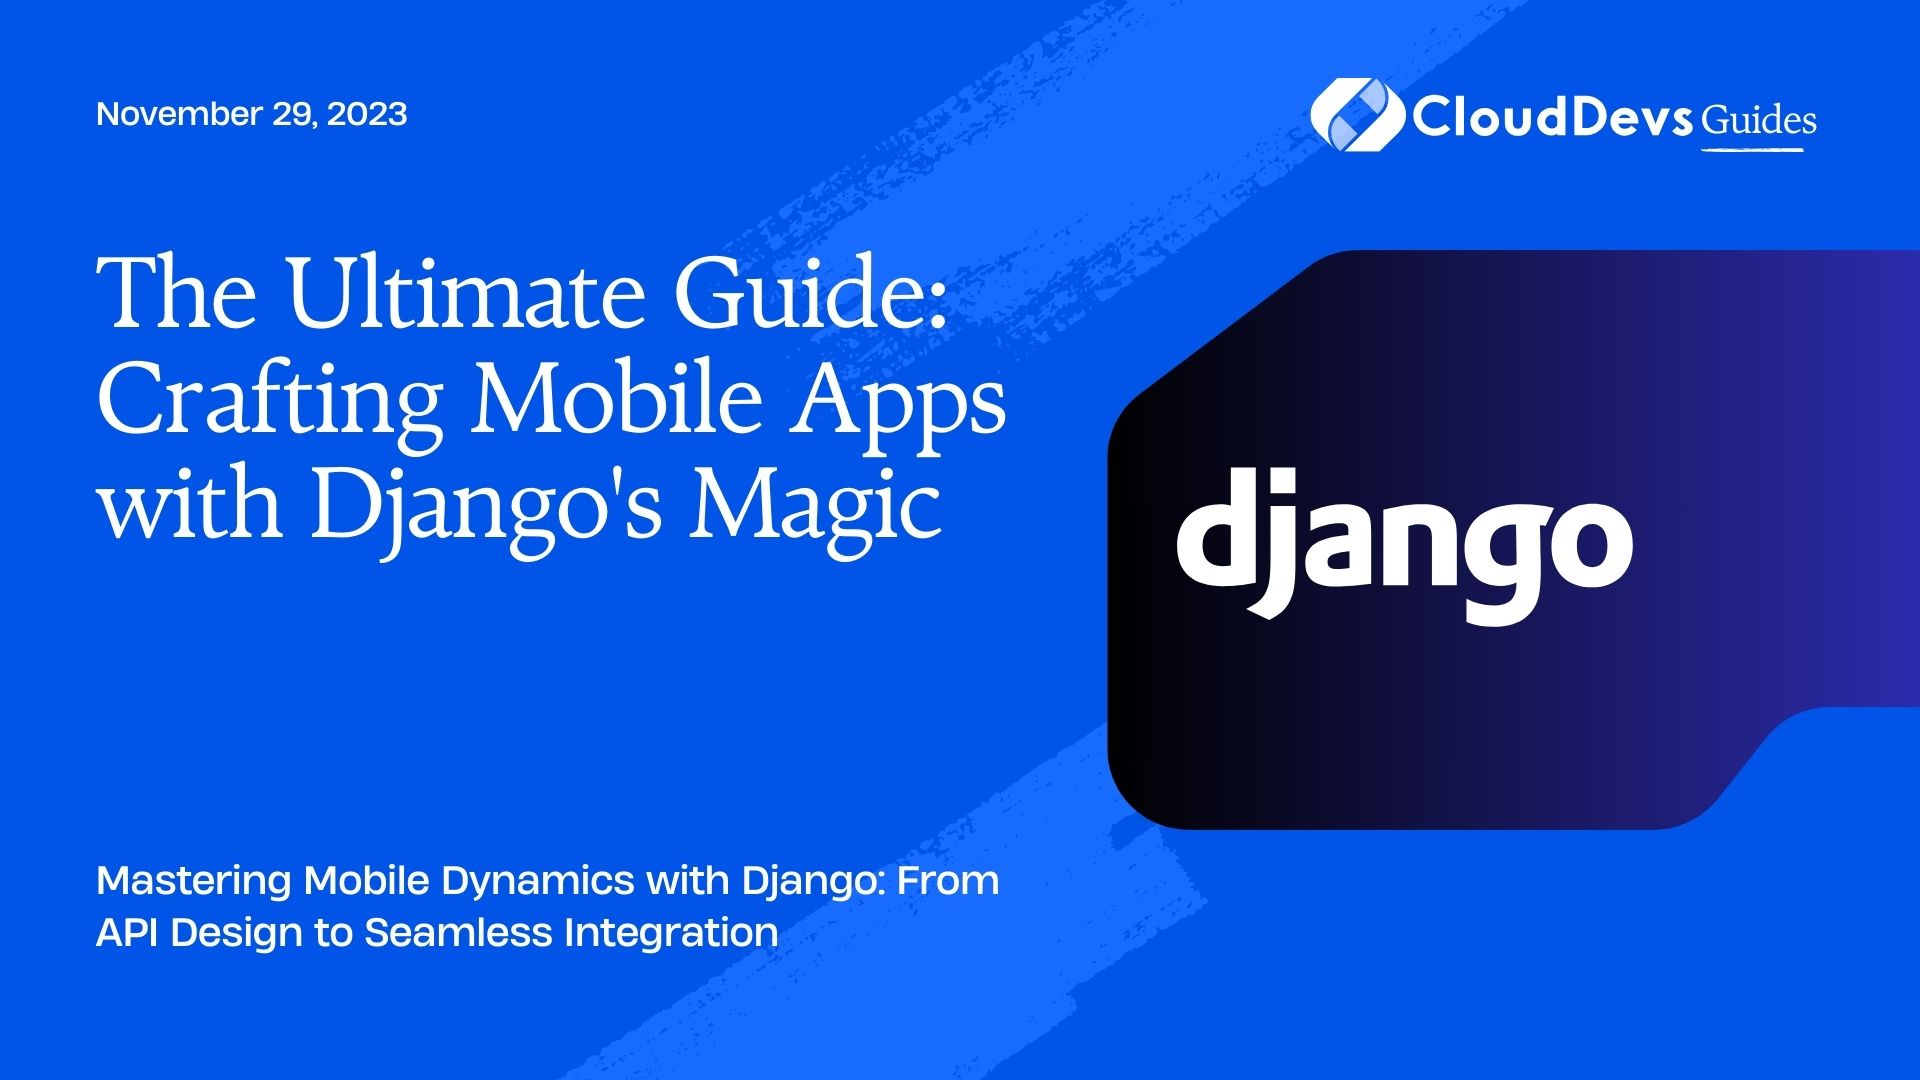 The Ultimate Guide: Crafting Mobile Apps with Django's Magic